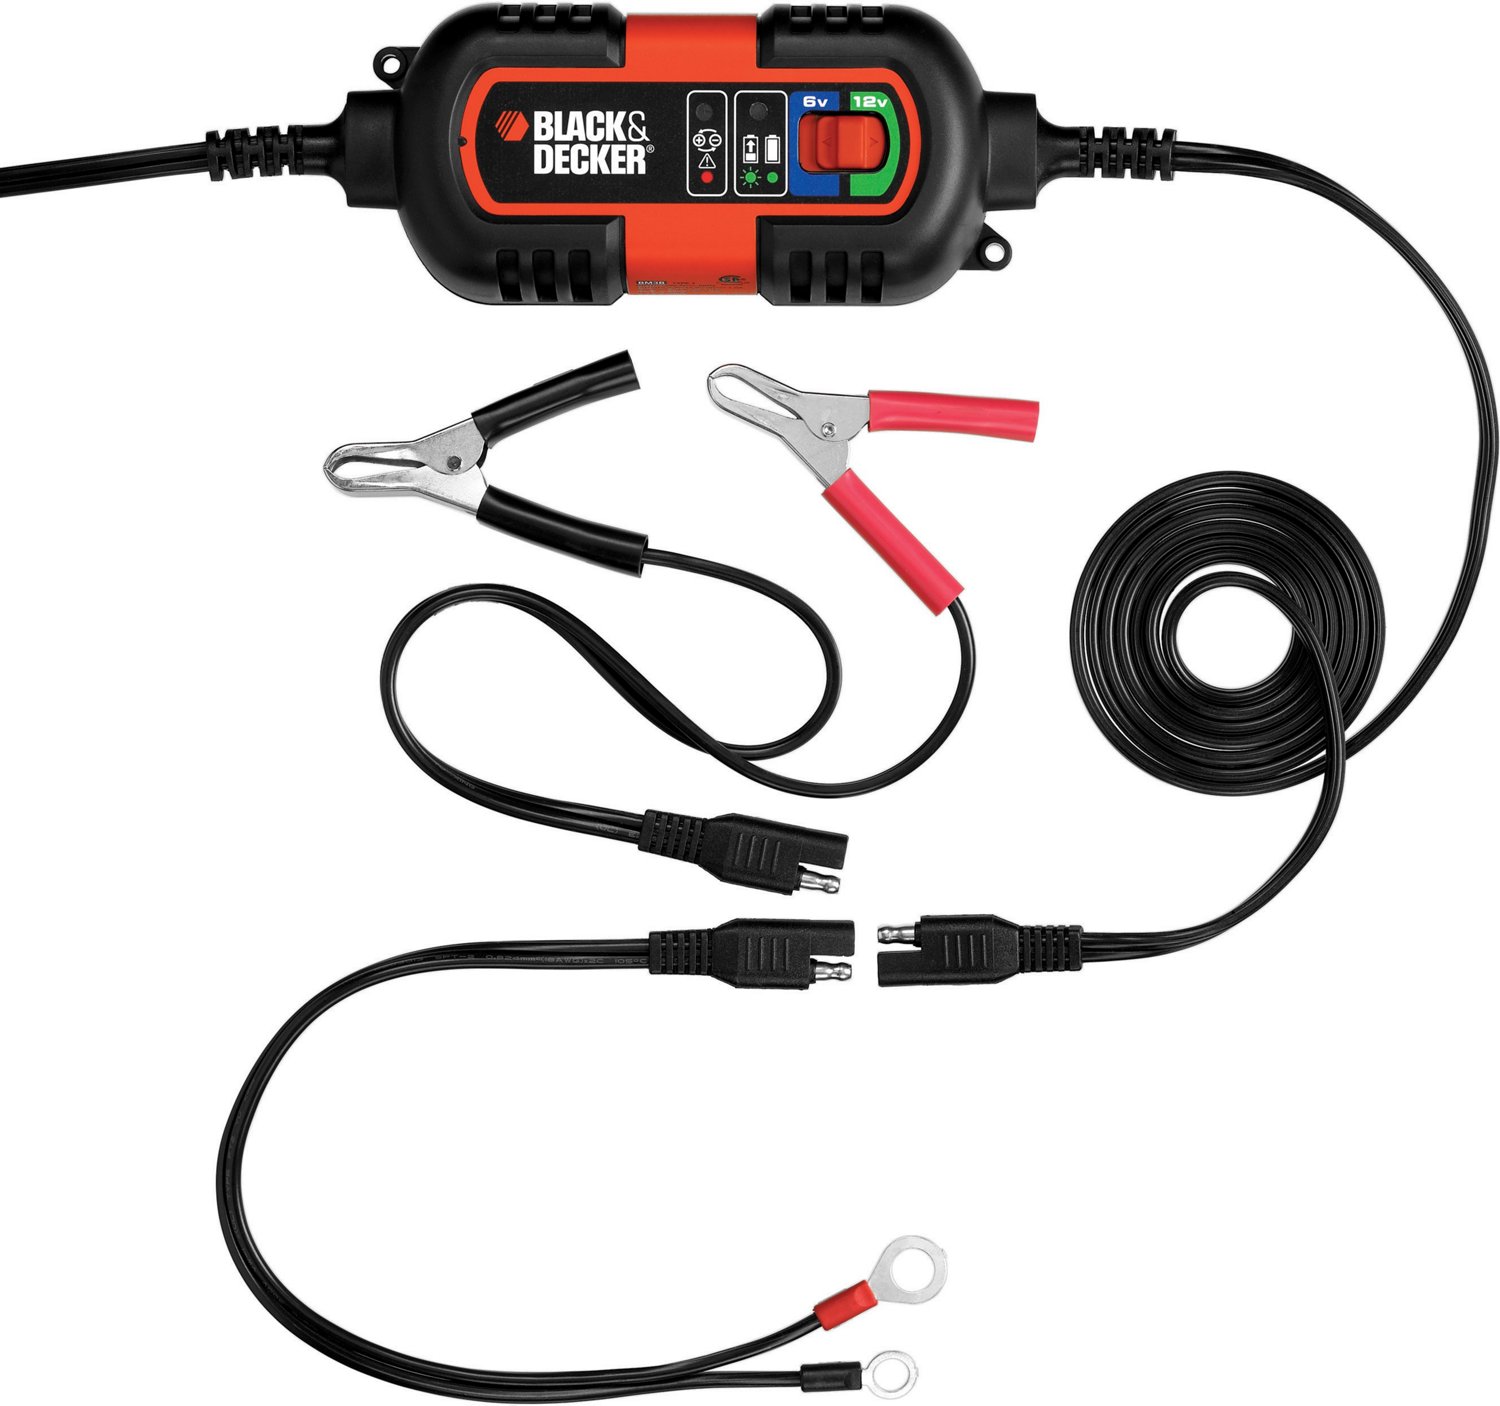 BLACK+DECKER BM3B Battery Maintainer / Trickle Charger for sale online